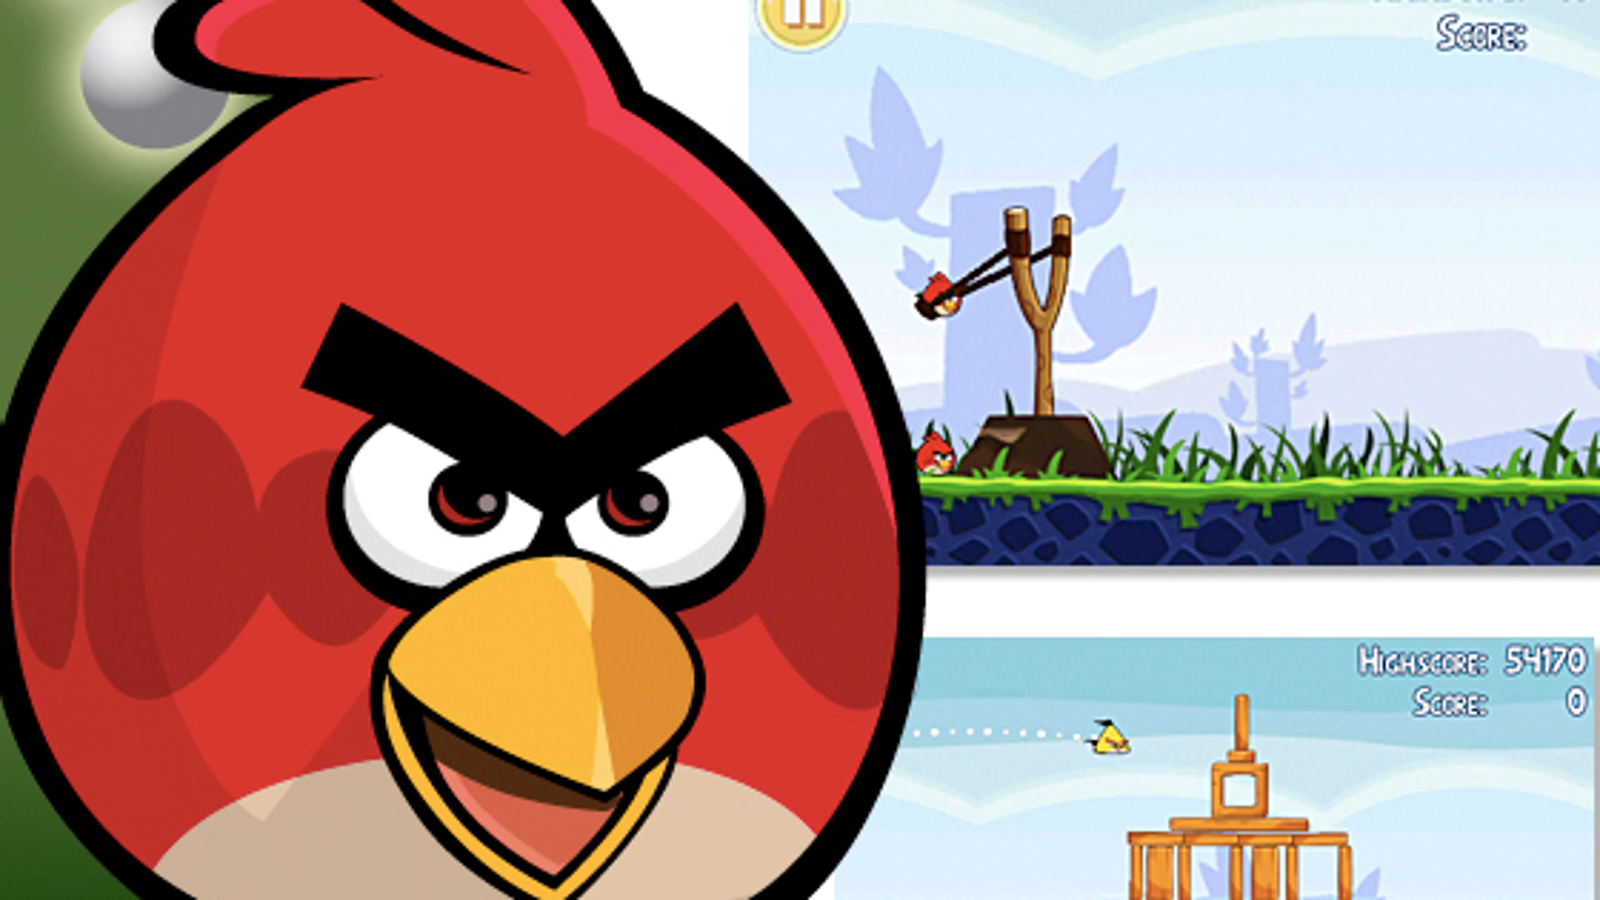 angry birds game free download for pc full version windows 7 64 bit